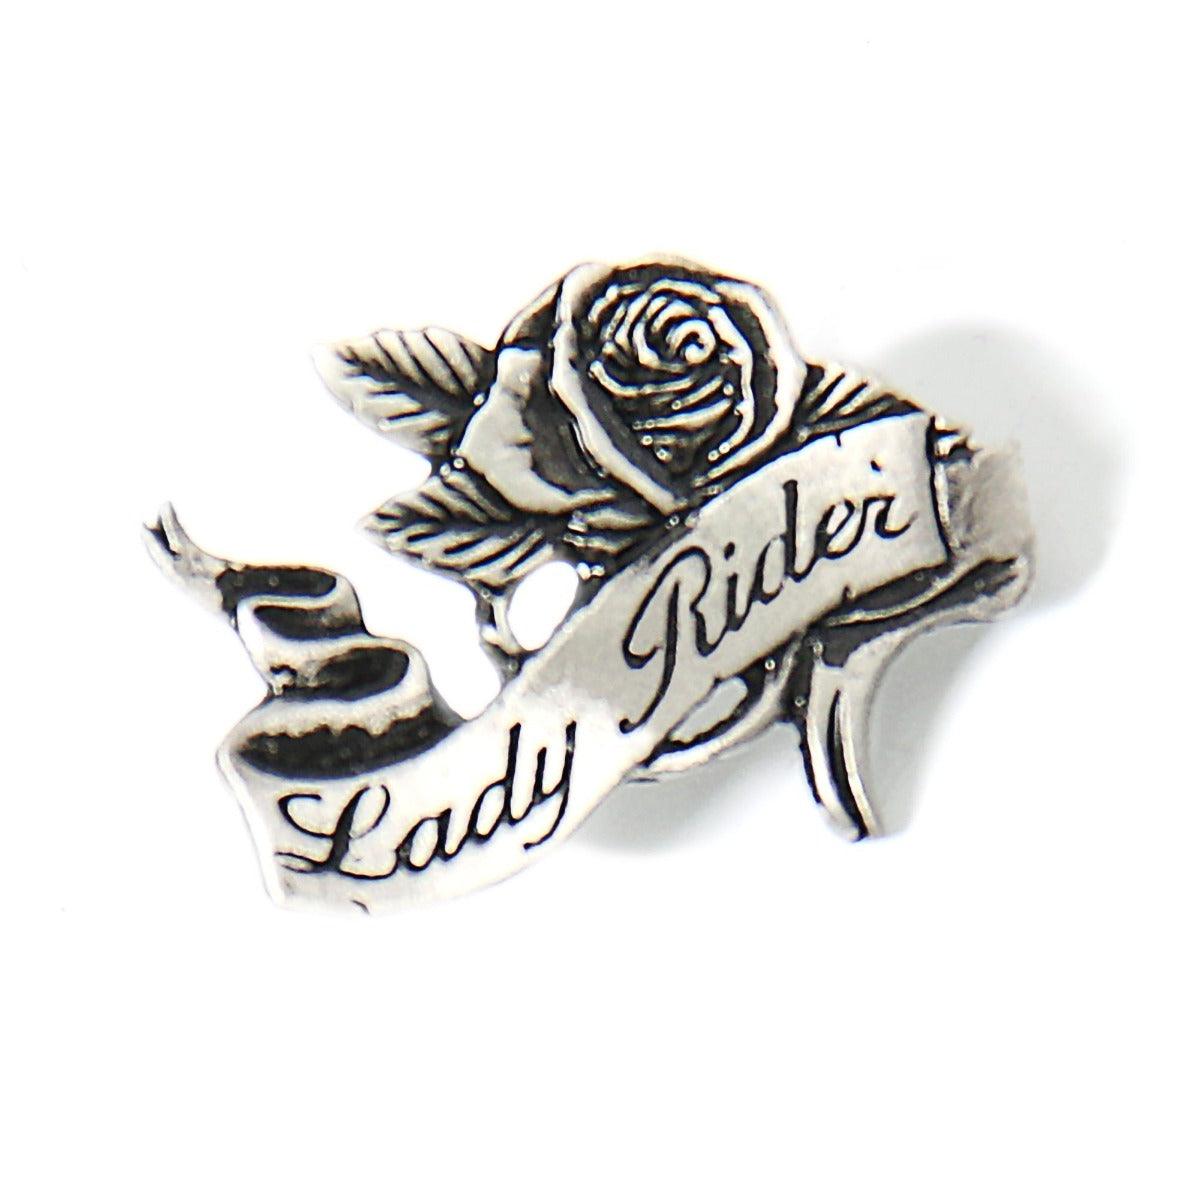 Hot Leathers Lady Rider Pin - American Legend Rider